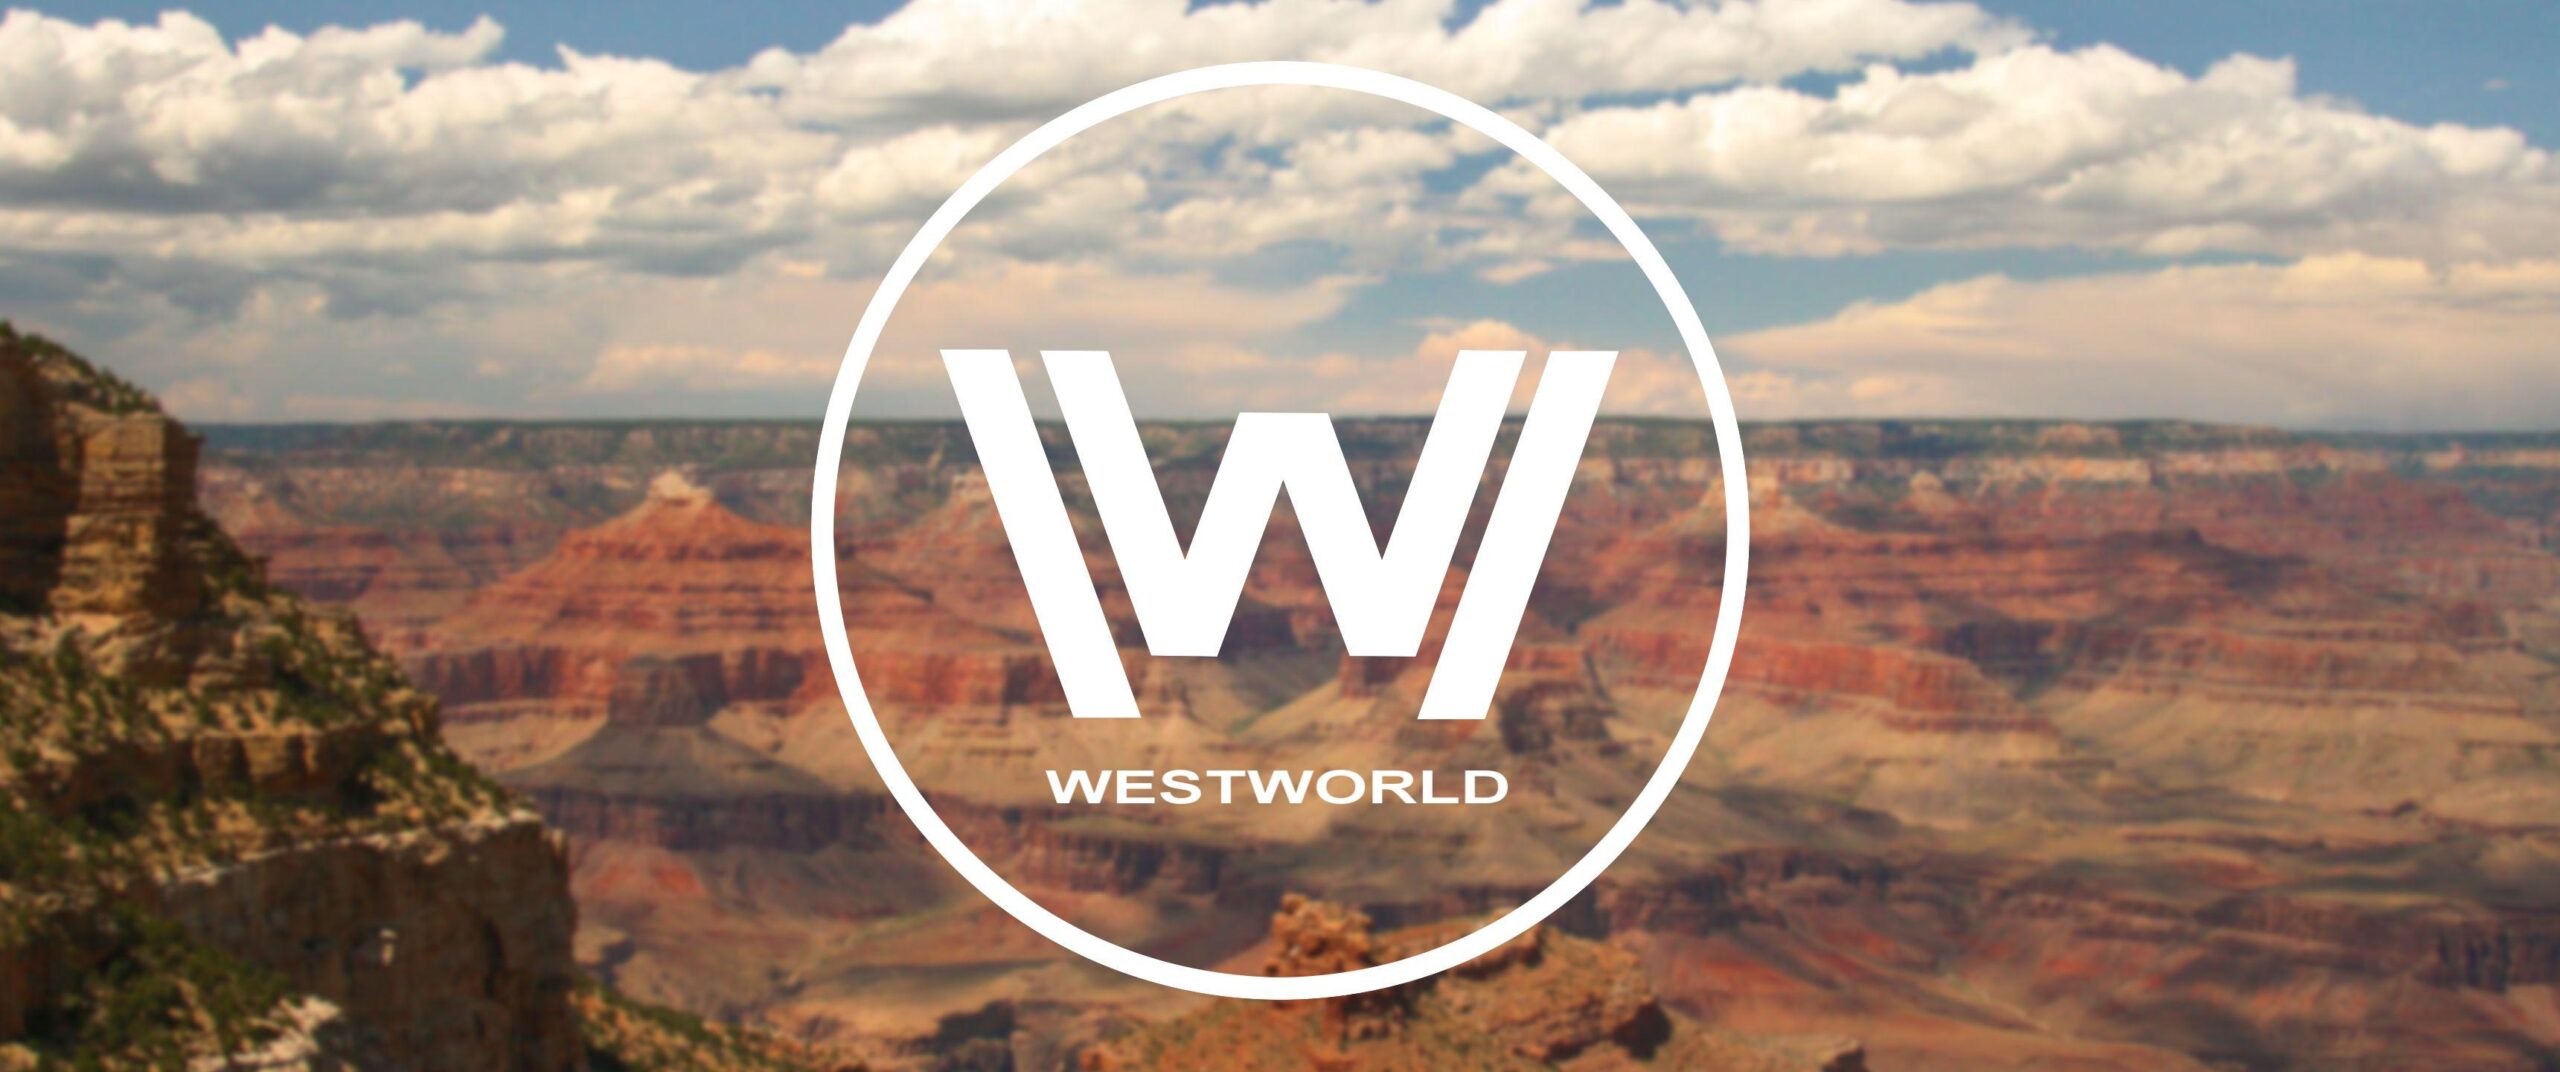 Haven’t seen a Westworld wallpapers for ultrawides Made a simple